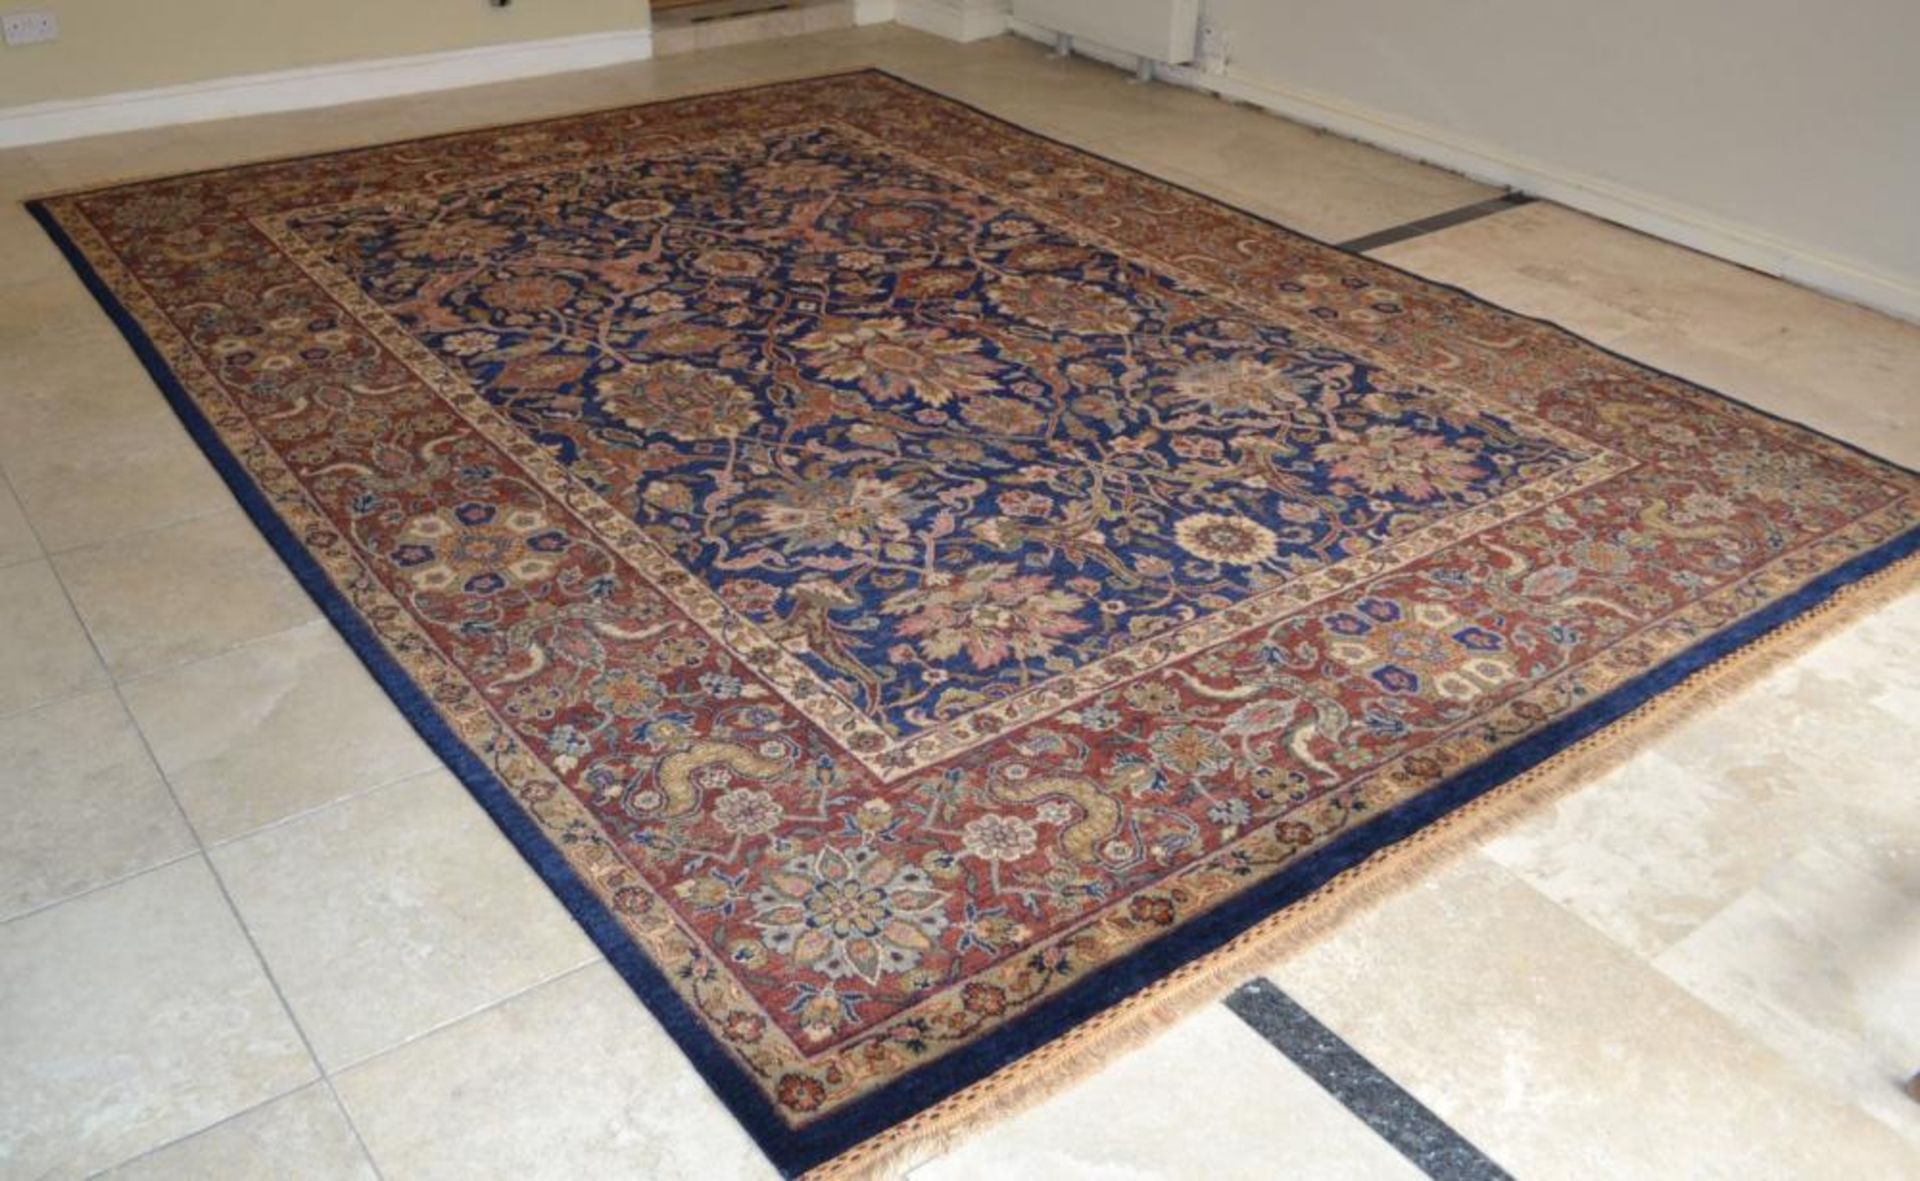 1 x Fine Indian Vegetable Dyed Handmade Carpet in Navy and Rust - All Wool With Cotton Foundation - - Image 19 of 22